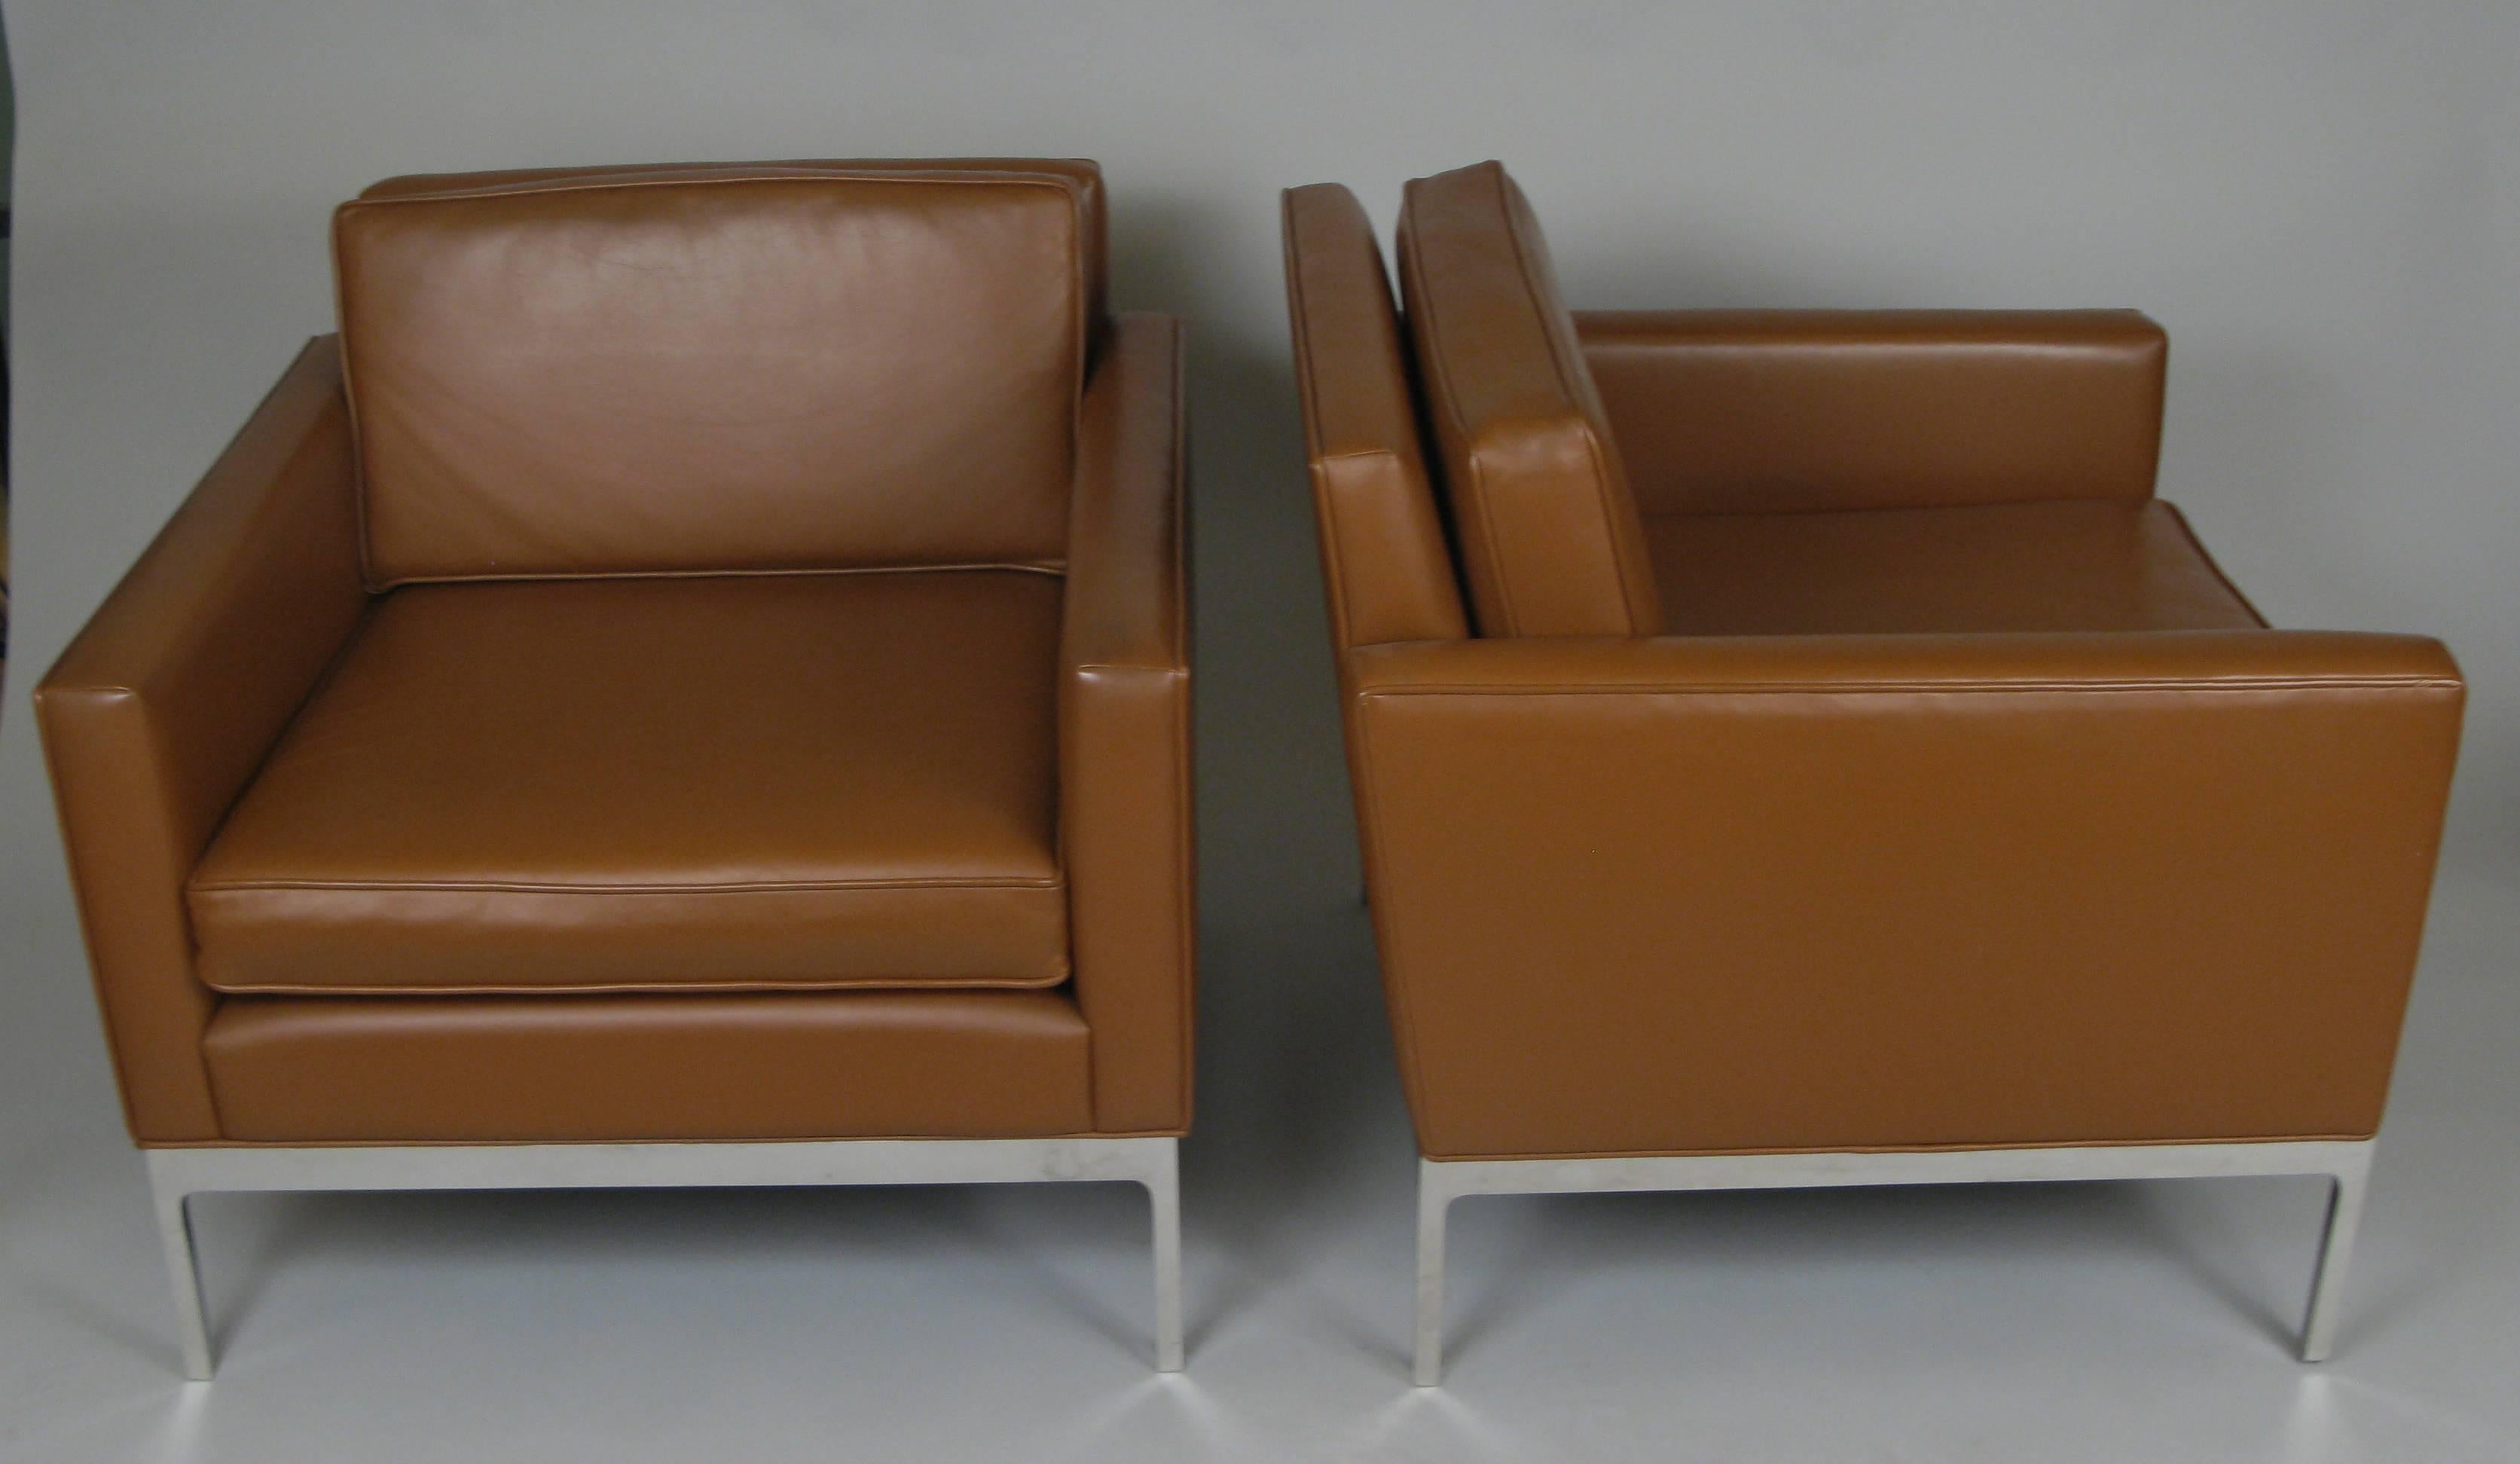 Pair of Leather and Polished Steel Lounge Chairs by Nicos Zographos 1